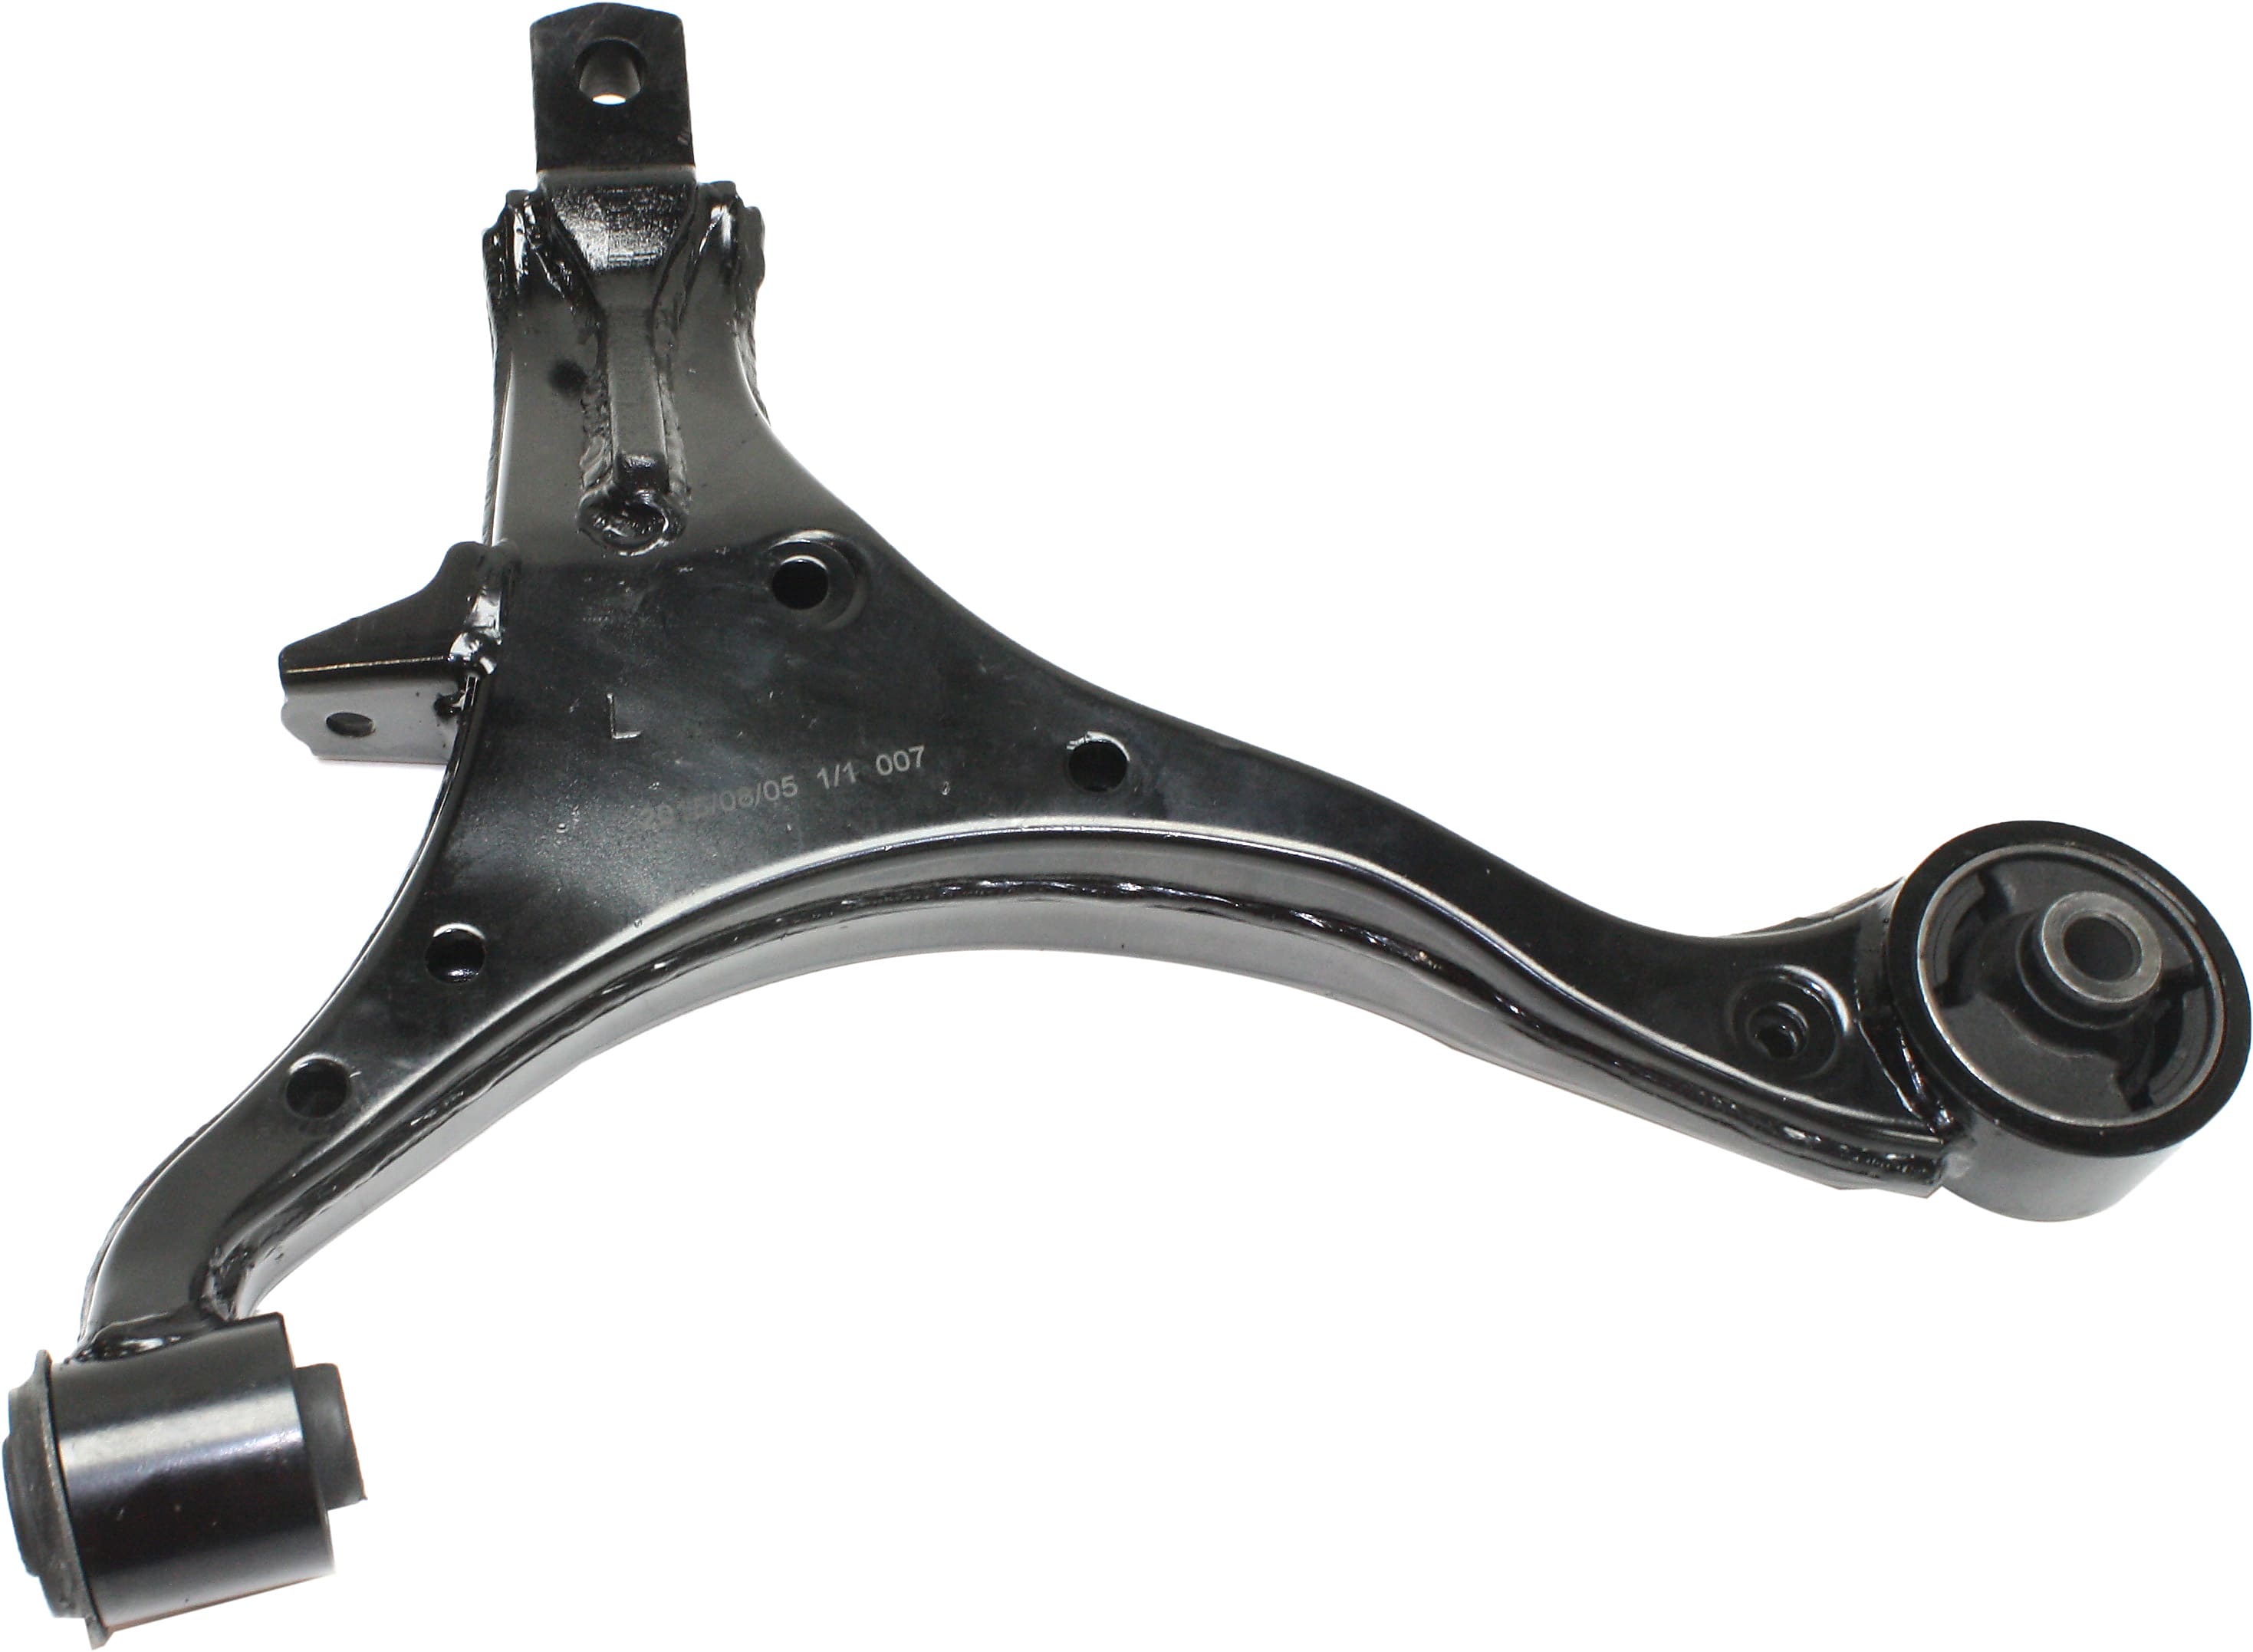 HONDA CR-V RIGHT & LEFT FRONT CONTROL ARMS $5 YEARS WARRANTY$